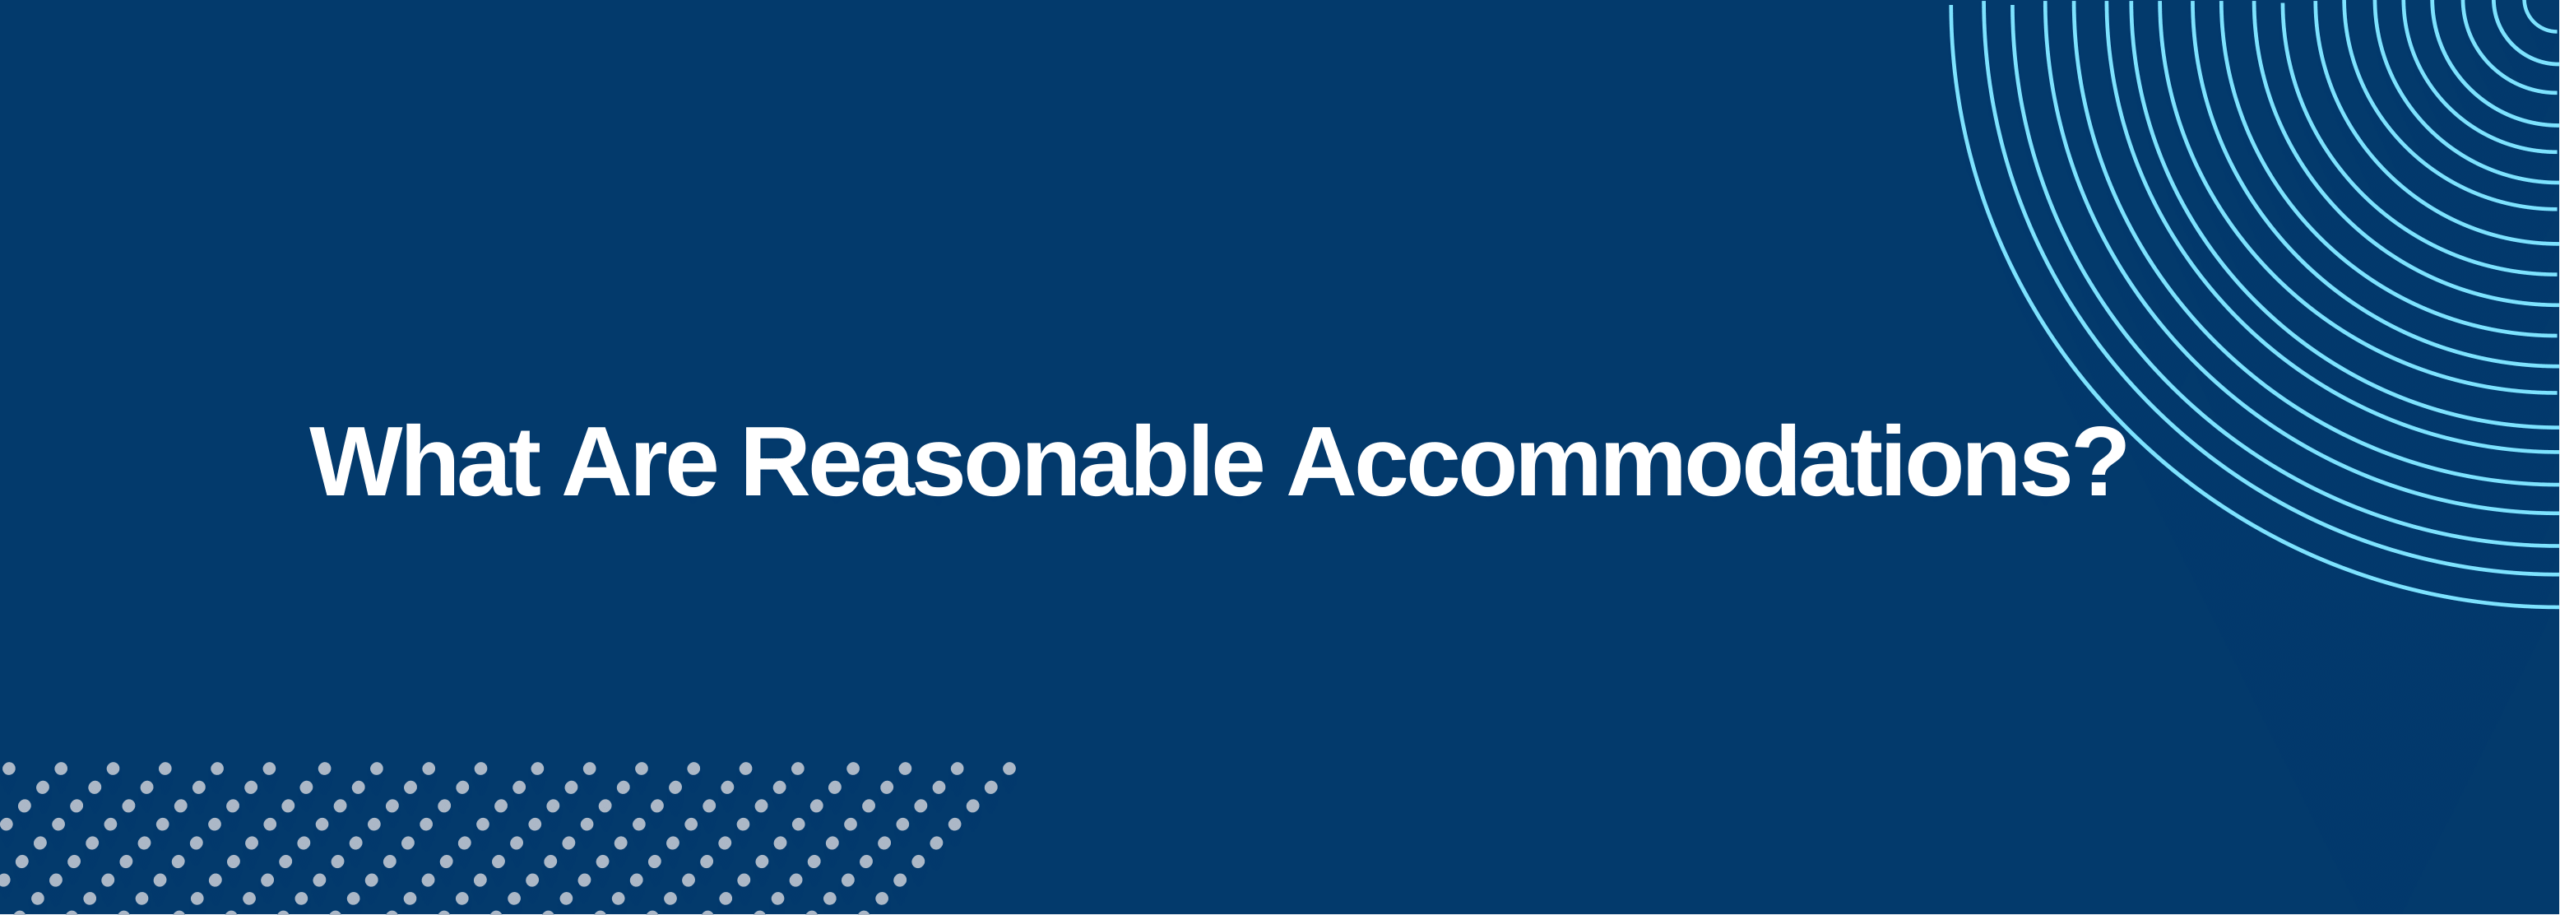 Reasonable accommodations are “a change, exception, or adjustment to a rule, policy, practice, or service,” according to HUD.